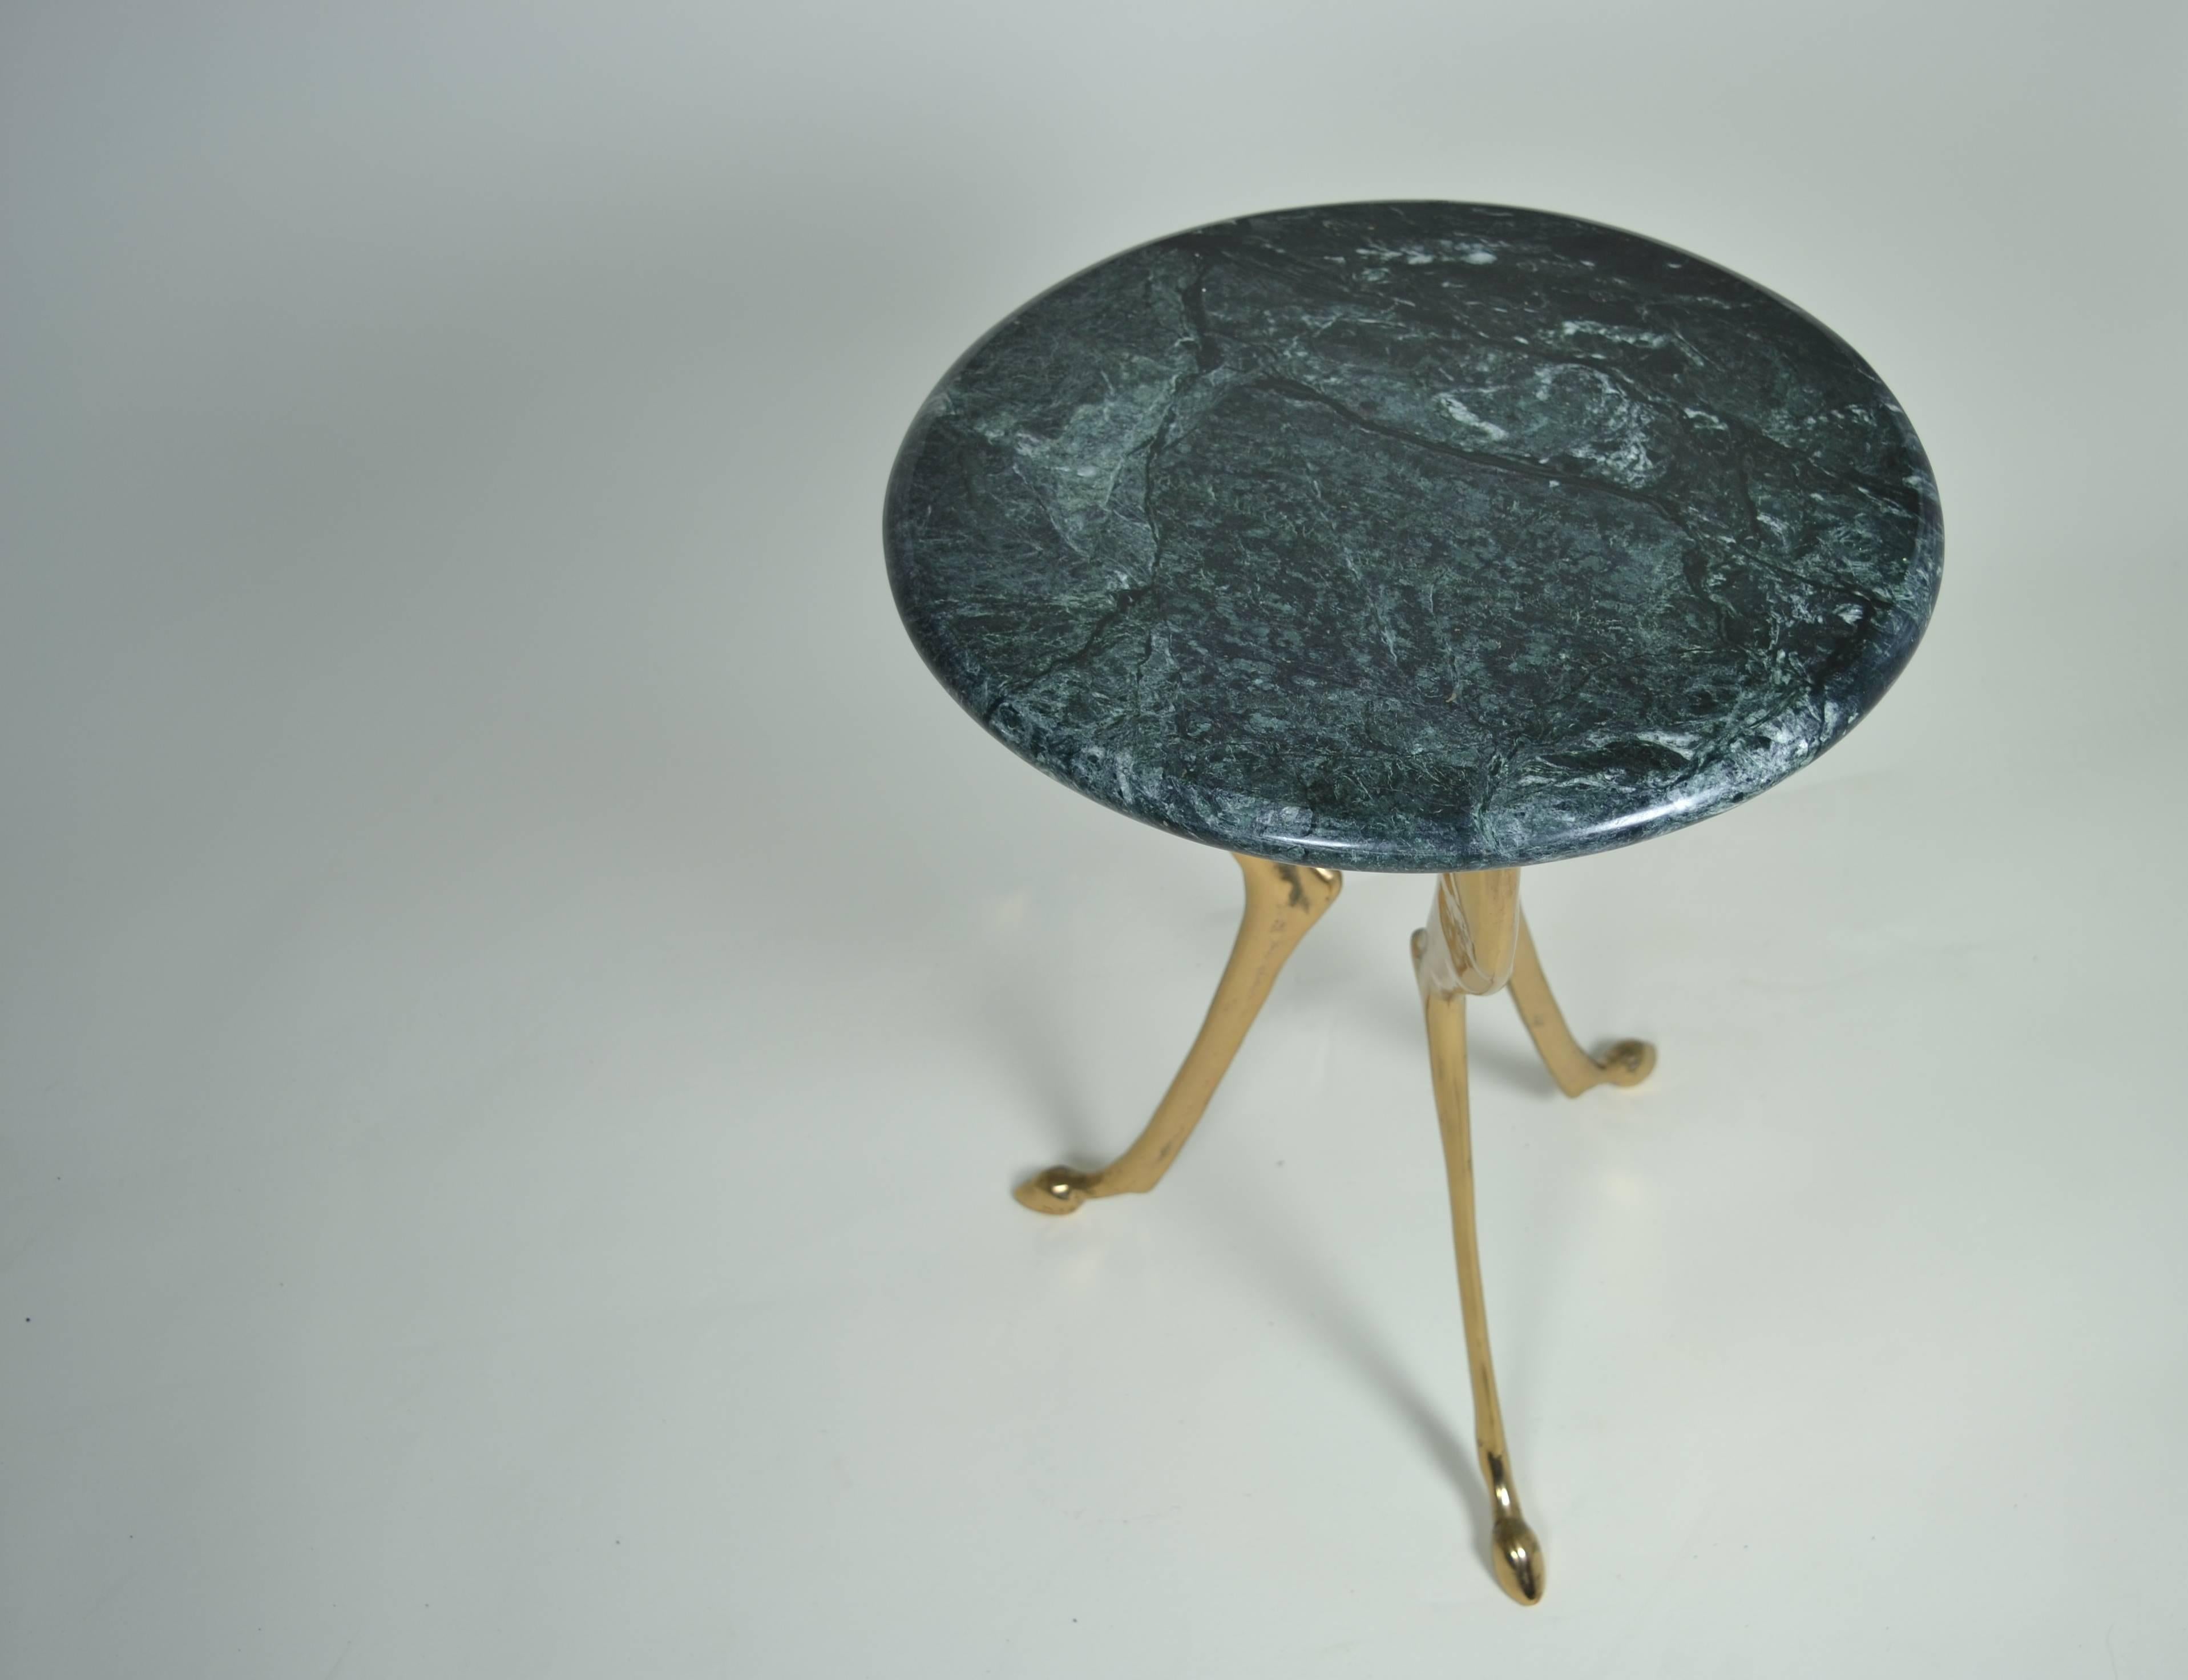 Super quality and great design in a small elegant table. Heavy, solid brass legs support a fine marble-top in dark green with subtle veining.